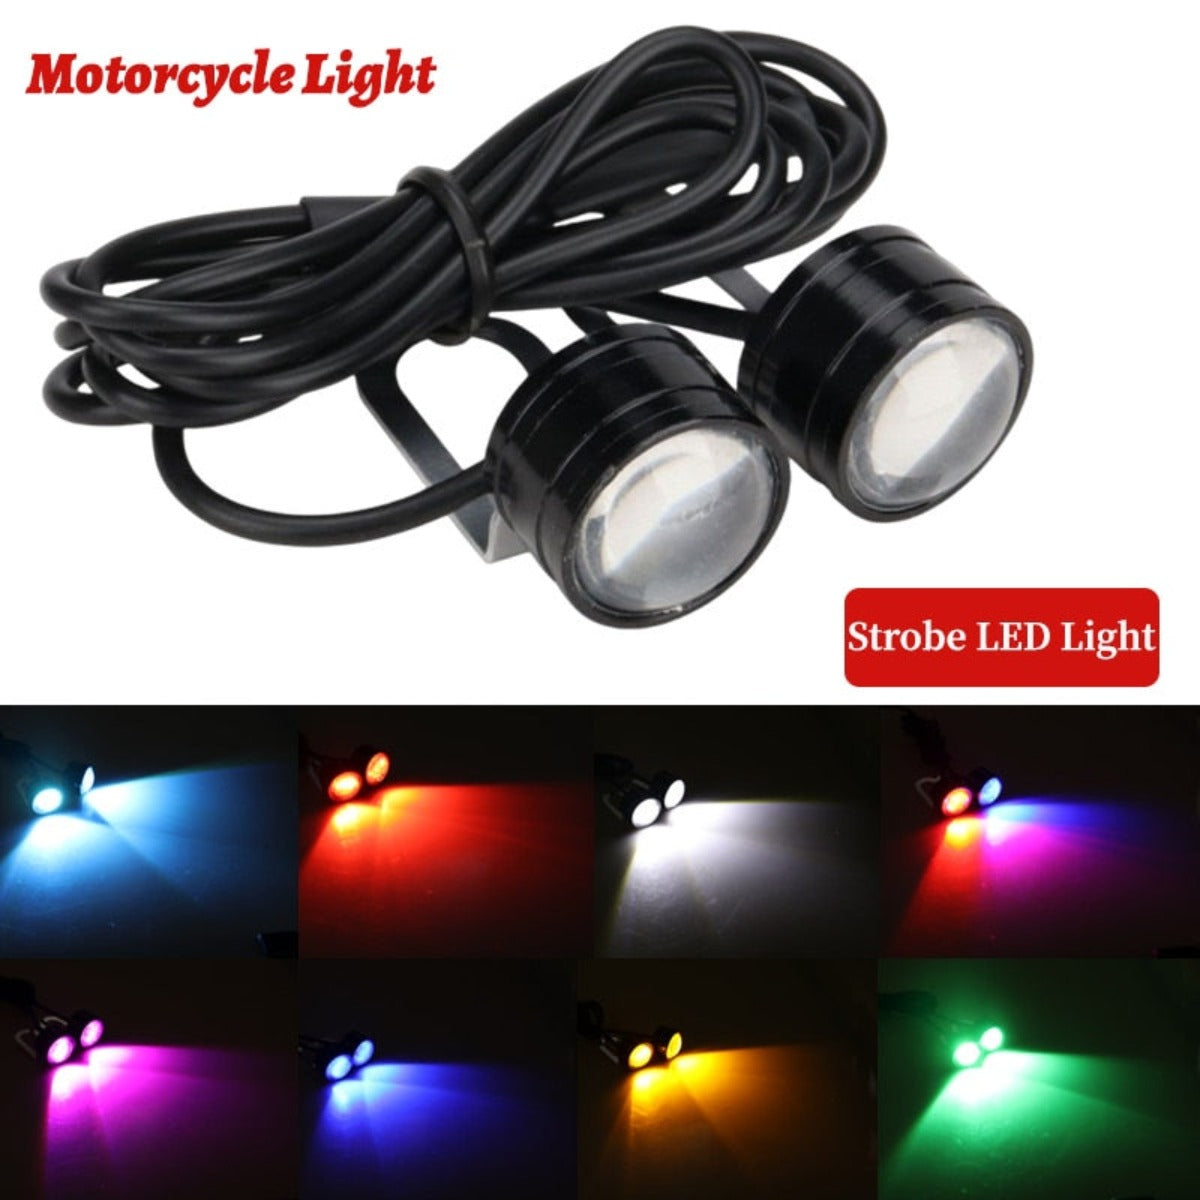 A colorful Motorcycle Strobe LED Driving Lights set ensuring visibility and safety.